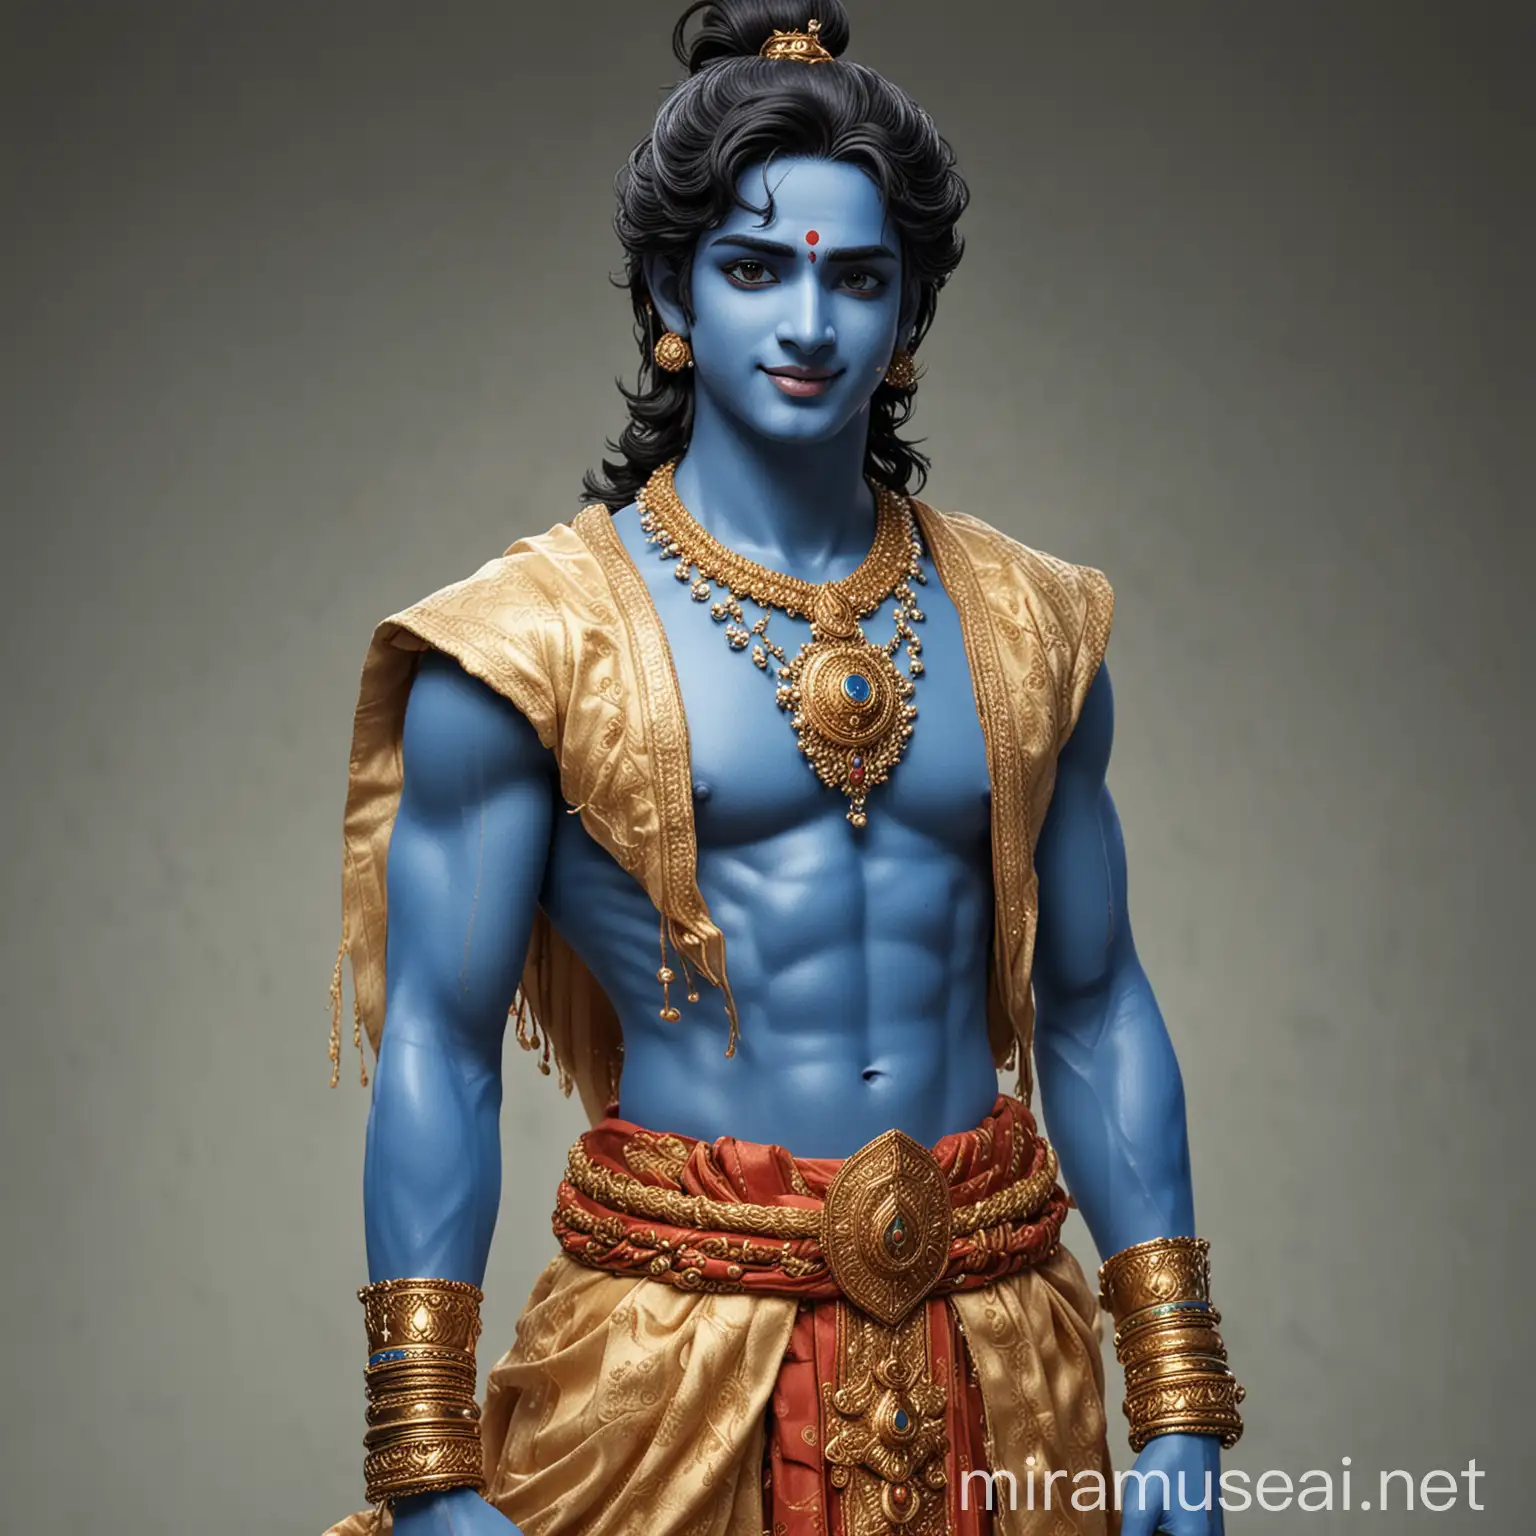 Handsome Lord Krishna with Blue Body in Mahabharata Setting